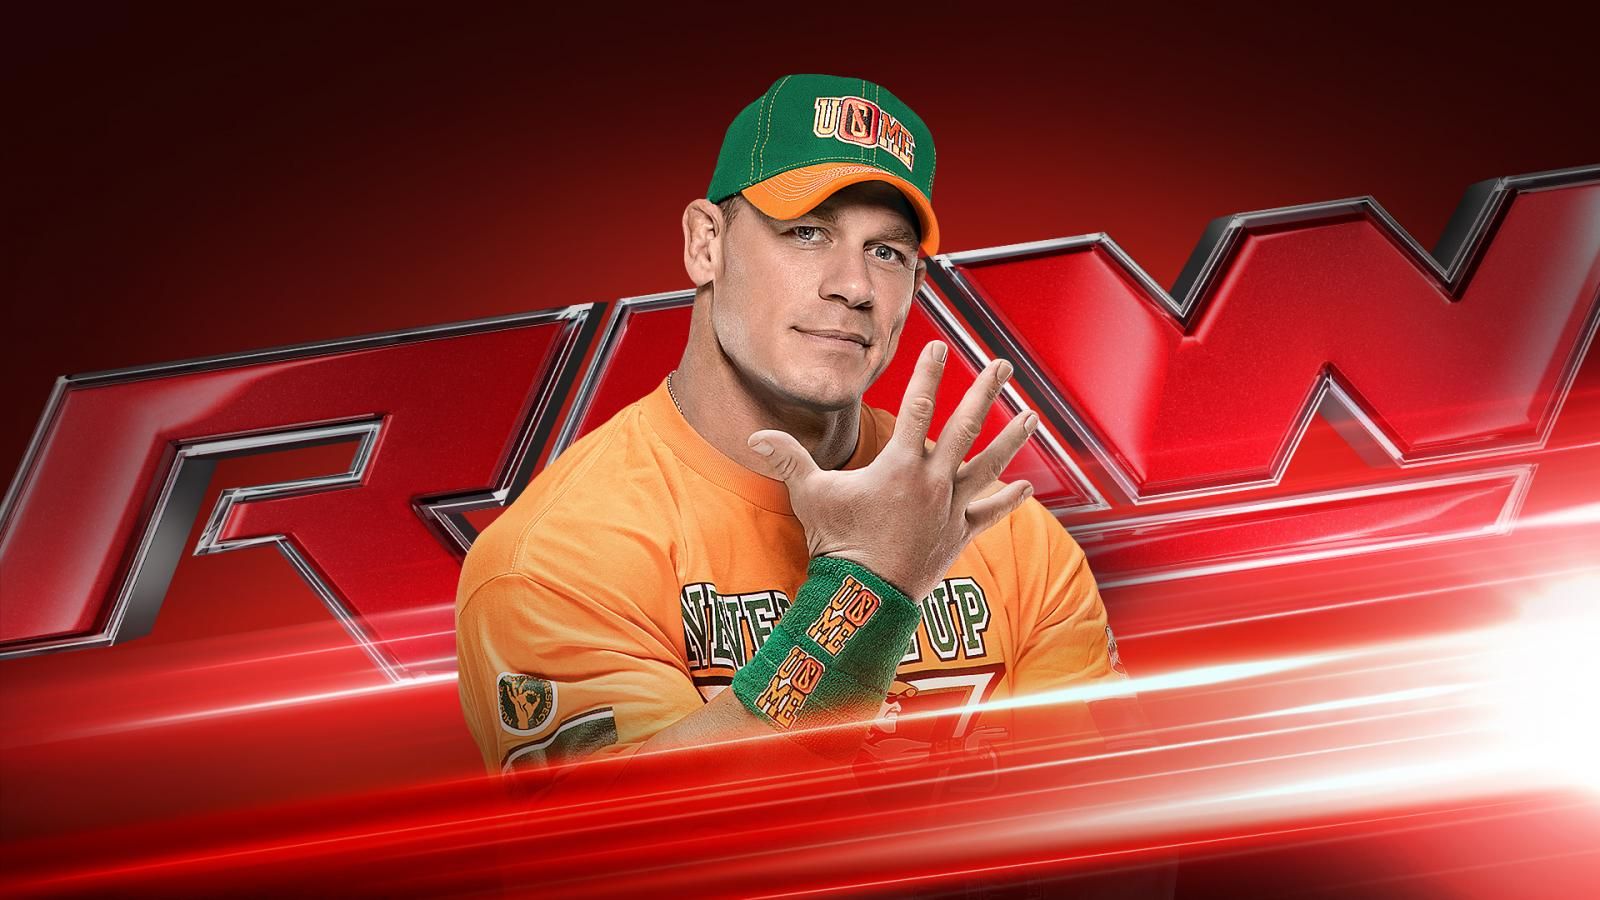 Nice Images Collection: WWE Raw Desktop Wallpapers